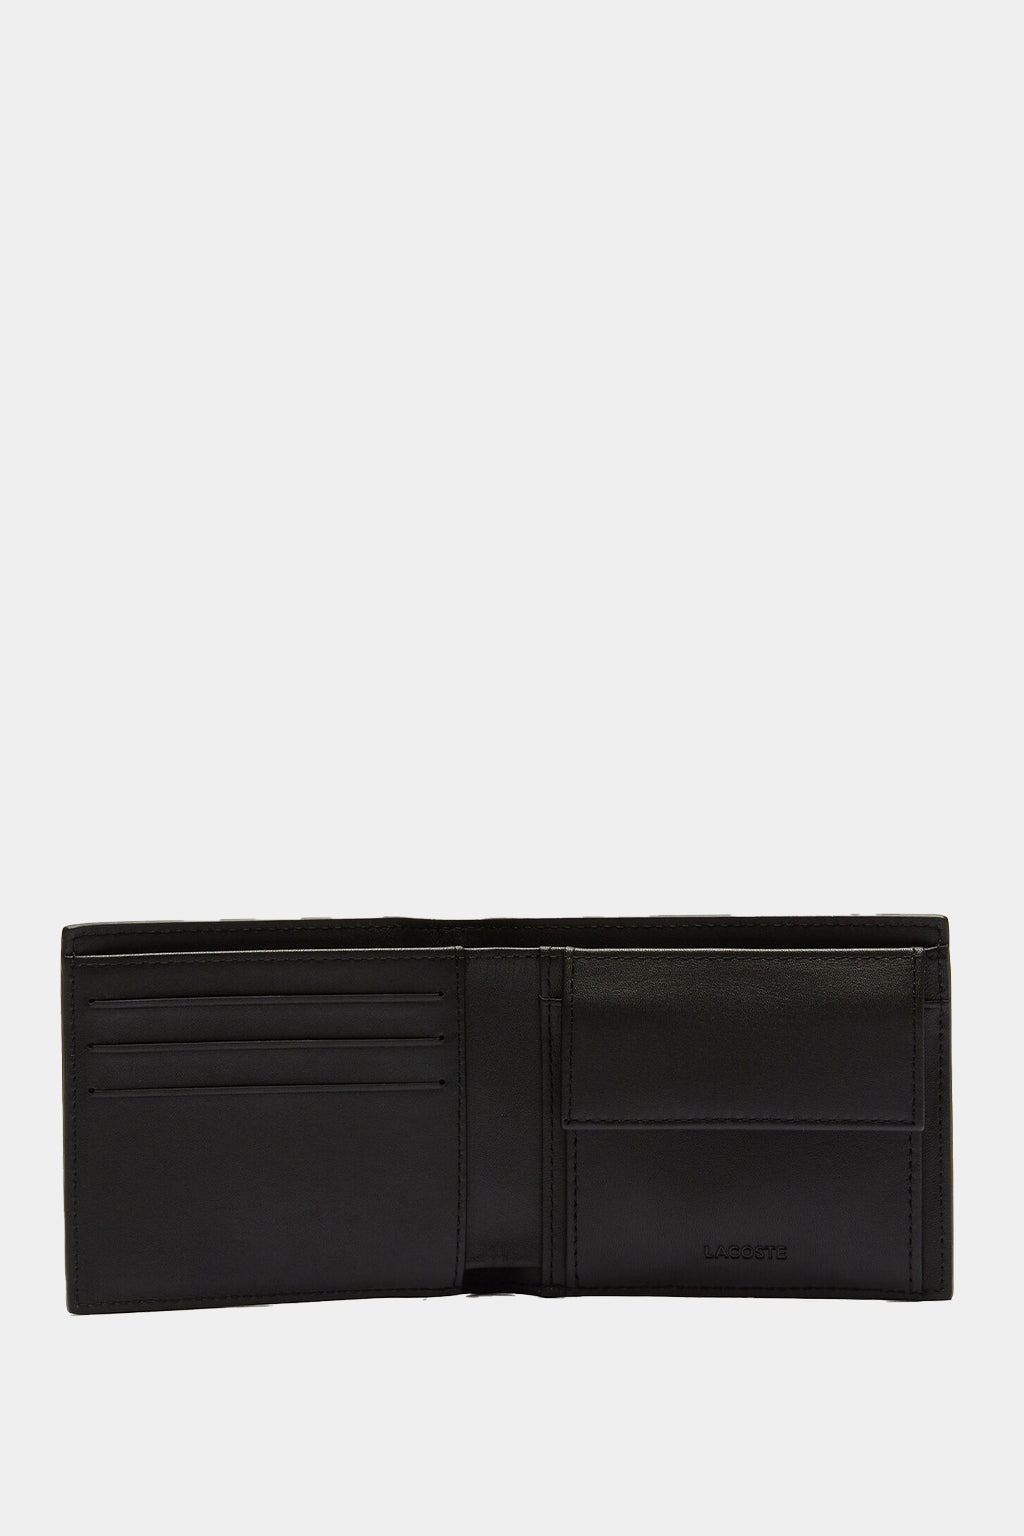 Lacoste - Wallet Large Billfold & Coin